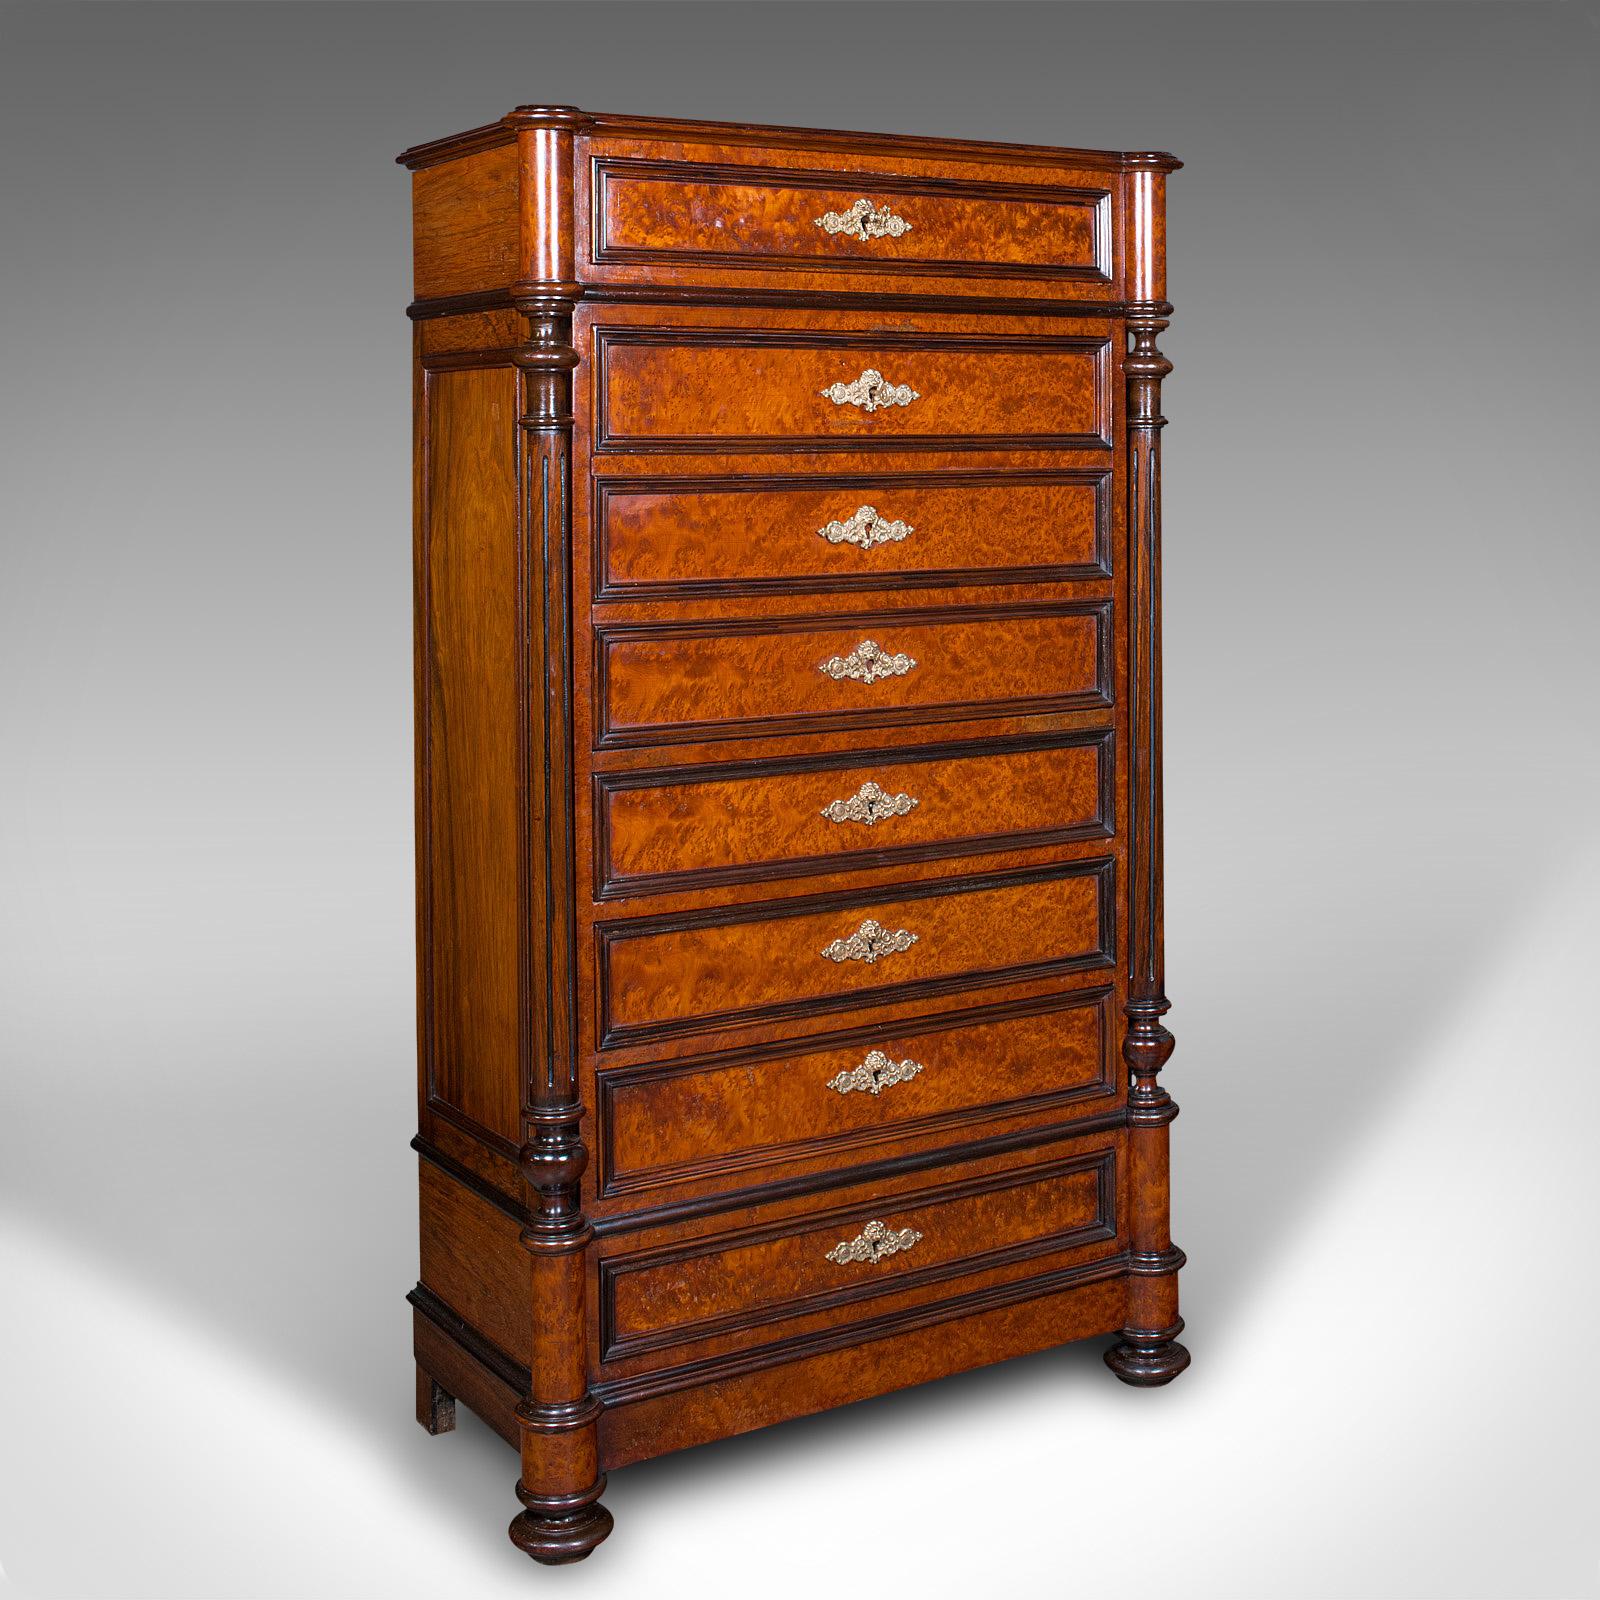 This is an antique escritoire cabinet. A French, burr walnut secretaire chest of drawers with writing desk, dating to the late Victorian period, circa 1900.

Attractive presentation, with quality figuring and generous writing slope
Displays a